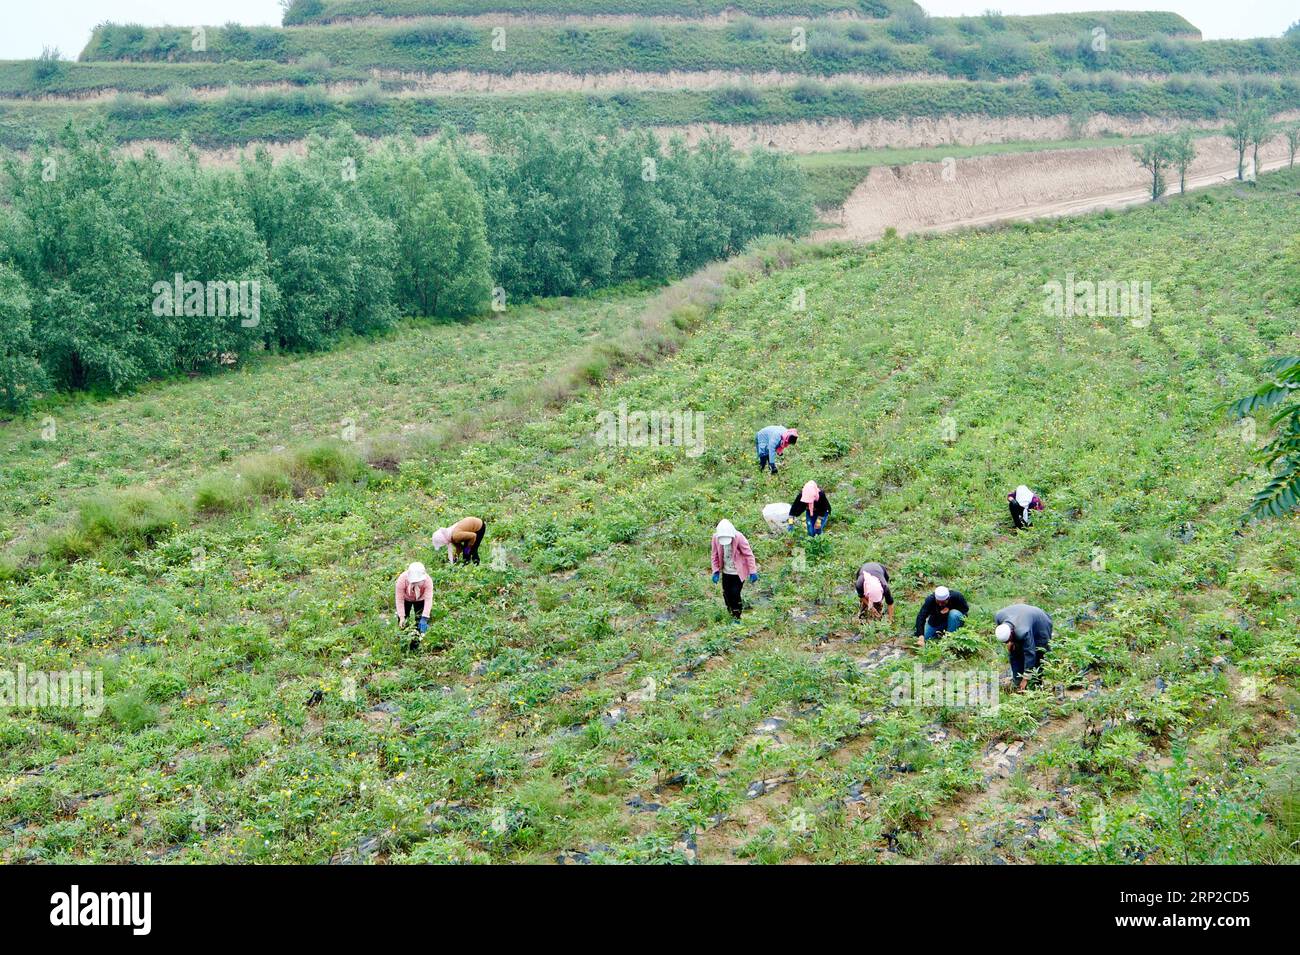 (180830) -- GUYUAN, Aug. 30, 2018 (Xinhua) -- Farmers pick peony flower seeds for oil manufacturing at a planting base in Yuanzhou District of Guyuan City, northwest China s Ningxia Hui Autonomous Region, Aug. 28, 2018. Yuanzhou government started to cooperate with the peony seed oil company Ruidanyuan in 2014 to establish a peony planting base for processing and production of peony products on barren mountains. So far, the planting base has created over 300 job opportunities for impoverished locals and achieved sound improvements on environmental protection. (Xinhua/Jiang Kehong) (hxy) CHINA- Stock Photo